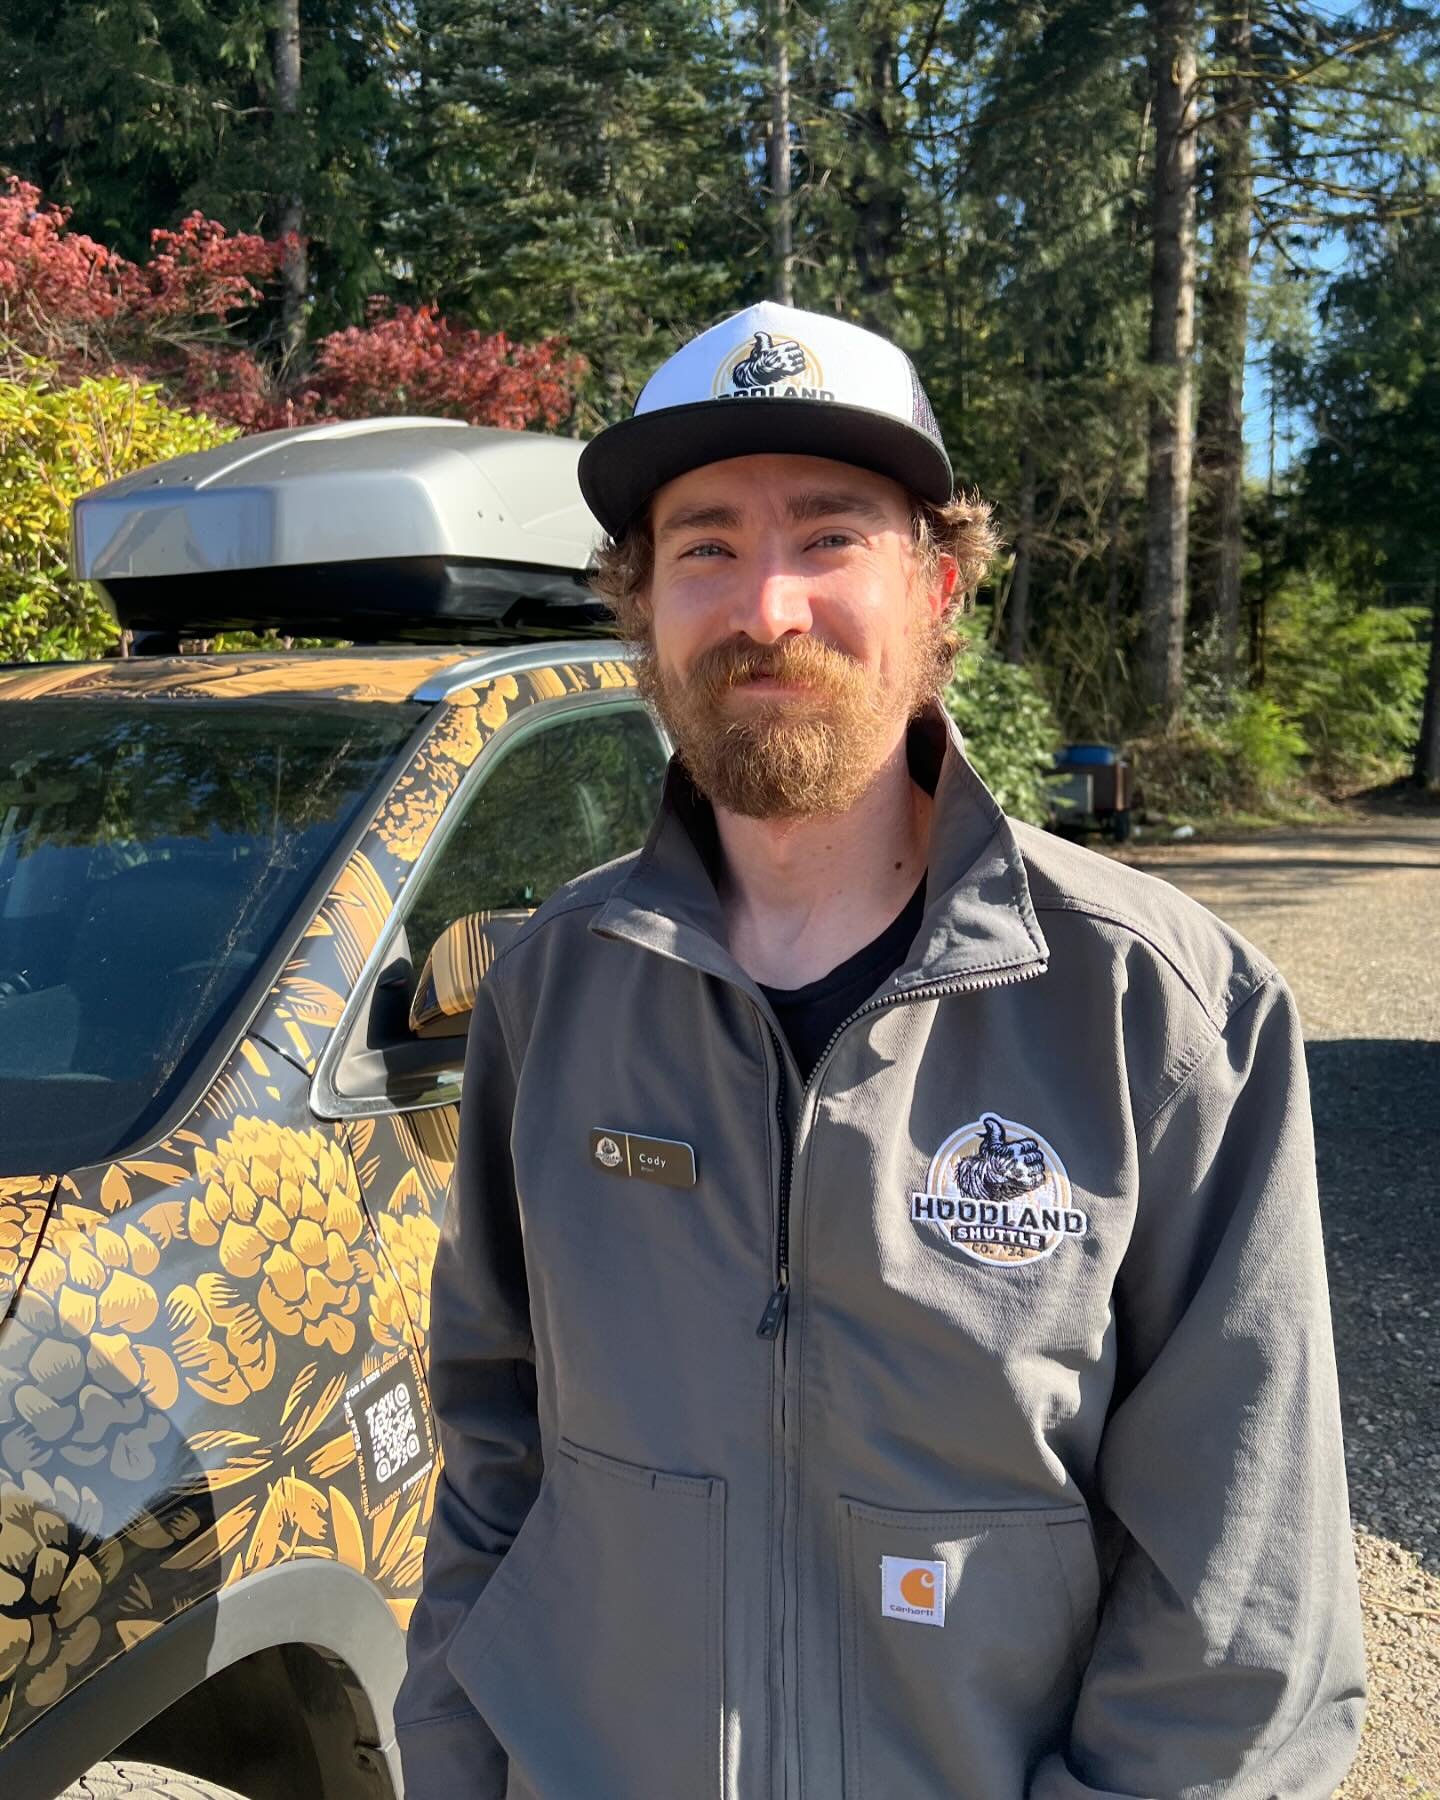 We are open for service! Call now for a ride! Cody is driving this evening till midnight. Here&rsquo;s a little driver spotlight to welcome Cody aboard! 🚖

&ldquo;Hello, my names Cody. I have been driving professionally in all weather conditions for